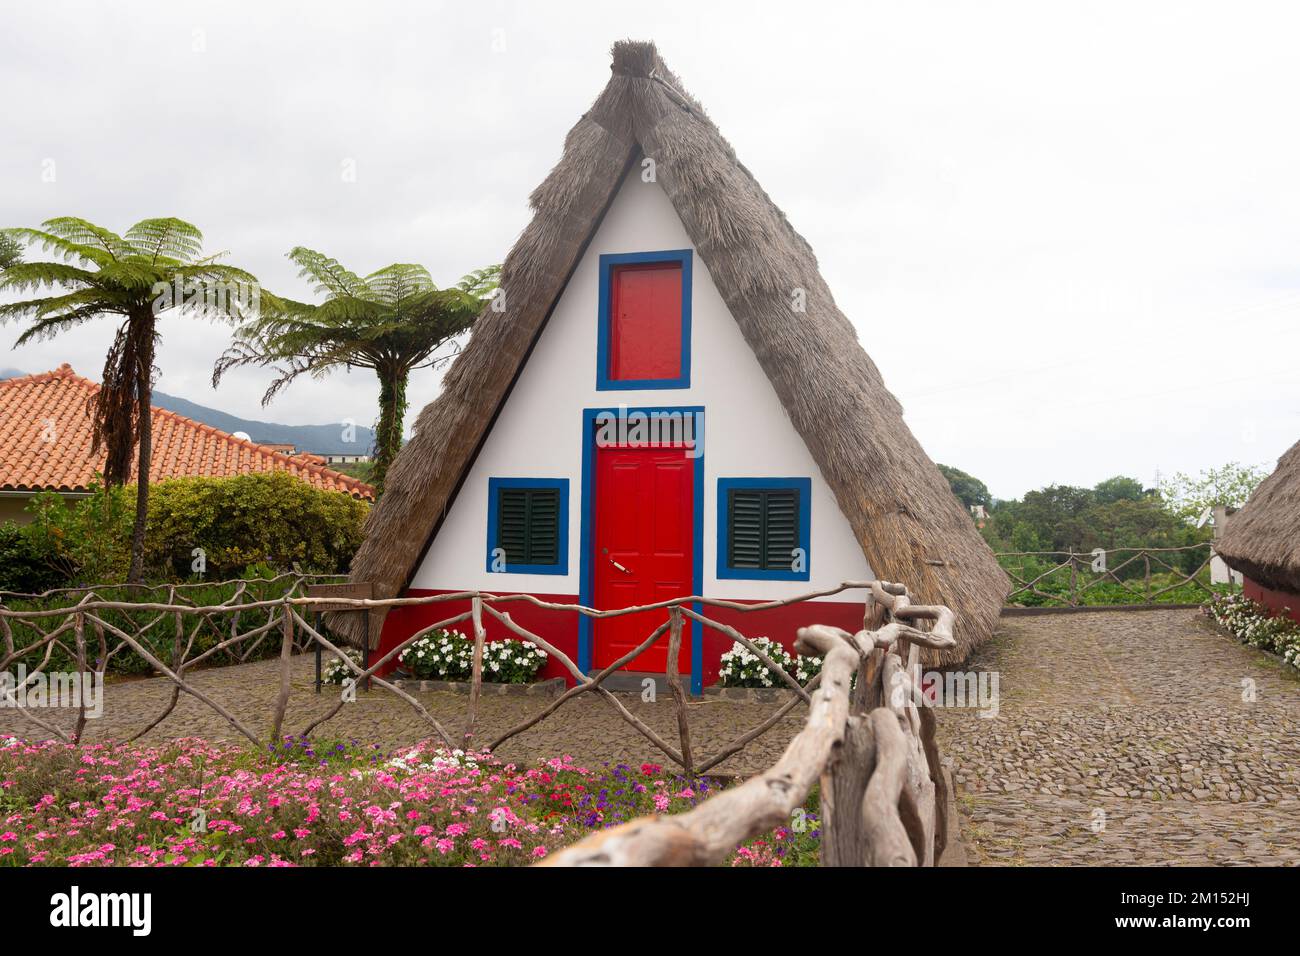 A typical small triangular house in Santana surrounded by beautiful gardens in Madeira Stock Photo